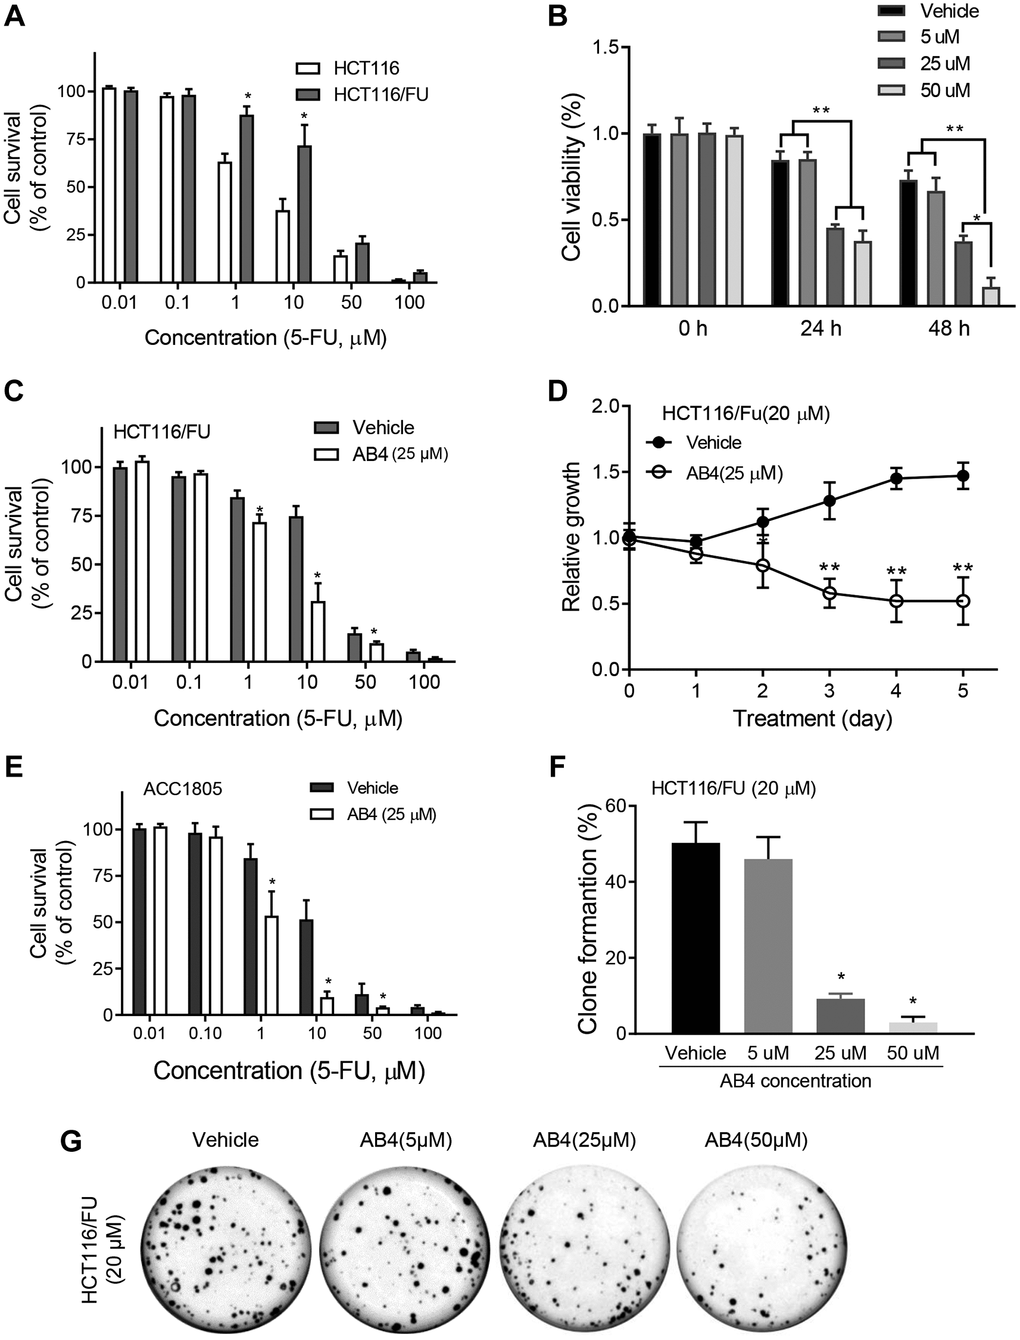 AB4 sensitizes colorectal cancer cells to 5-FU treatment in vitro. (A) HCT116 and HCT116/FU cells were treated with a gradient concentration of 5-FU (0–100 μM), which showed increased cell survival of HCT116/FU cells than parental cells. (B) HCT116/FU cells were treated with 5-FU (20 μM) and different concentration of AB4 (5–50 μM) for 24 or 48 hours. Cell viability was measured by MTT assays. (C, E) HCT116/FU and ACC1805 cells were treated with 25 μM AB4 and a gradient of 5-FU for 48 h. The cell proliferation was analyzed. (D) HCT116/FU cells were treated with AB4 (25 μM) and/ or 5-FU (20 μM) for 5 days. Cell proliferation was examined with MTT assay. (F, G) Colony formation assays were performed with HCT116/FU cells, which showed reduced number of colonies in AB4 treated group (≥25 μM) than vehicle or 5 μM AB4 treated groups. These results represent the average of three independent experiments. Data are shown as means ± SEM. *P 